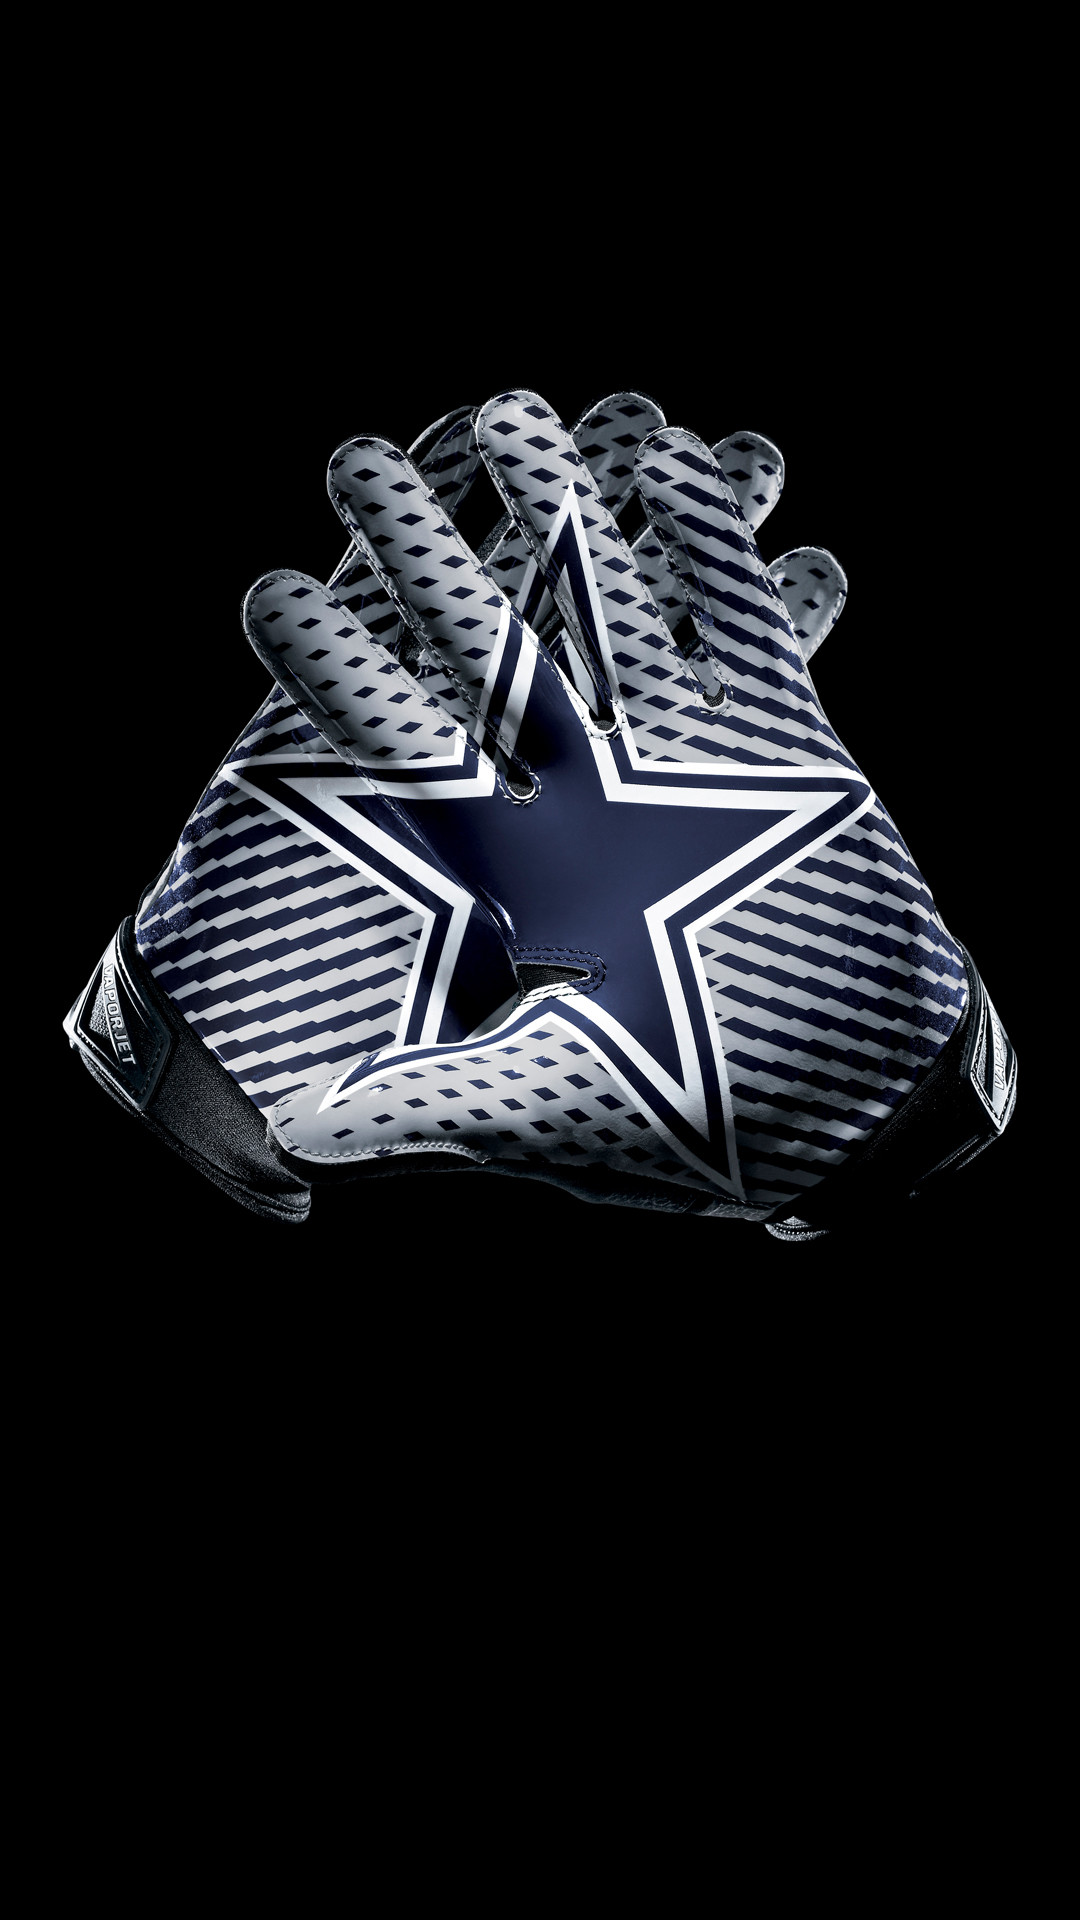 1080x1920 Dallas Cowboys Wallpaper For Cell Phones with dark background